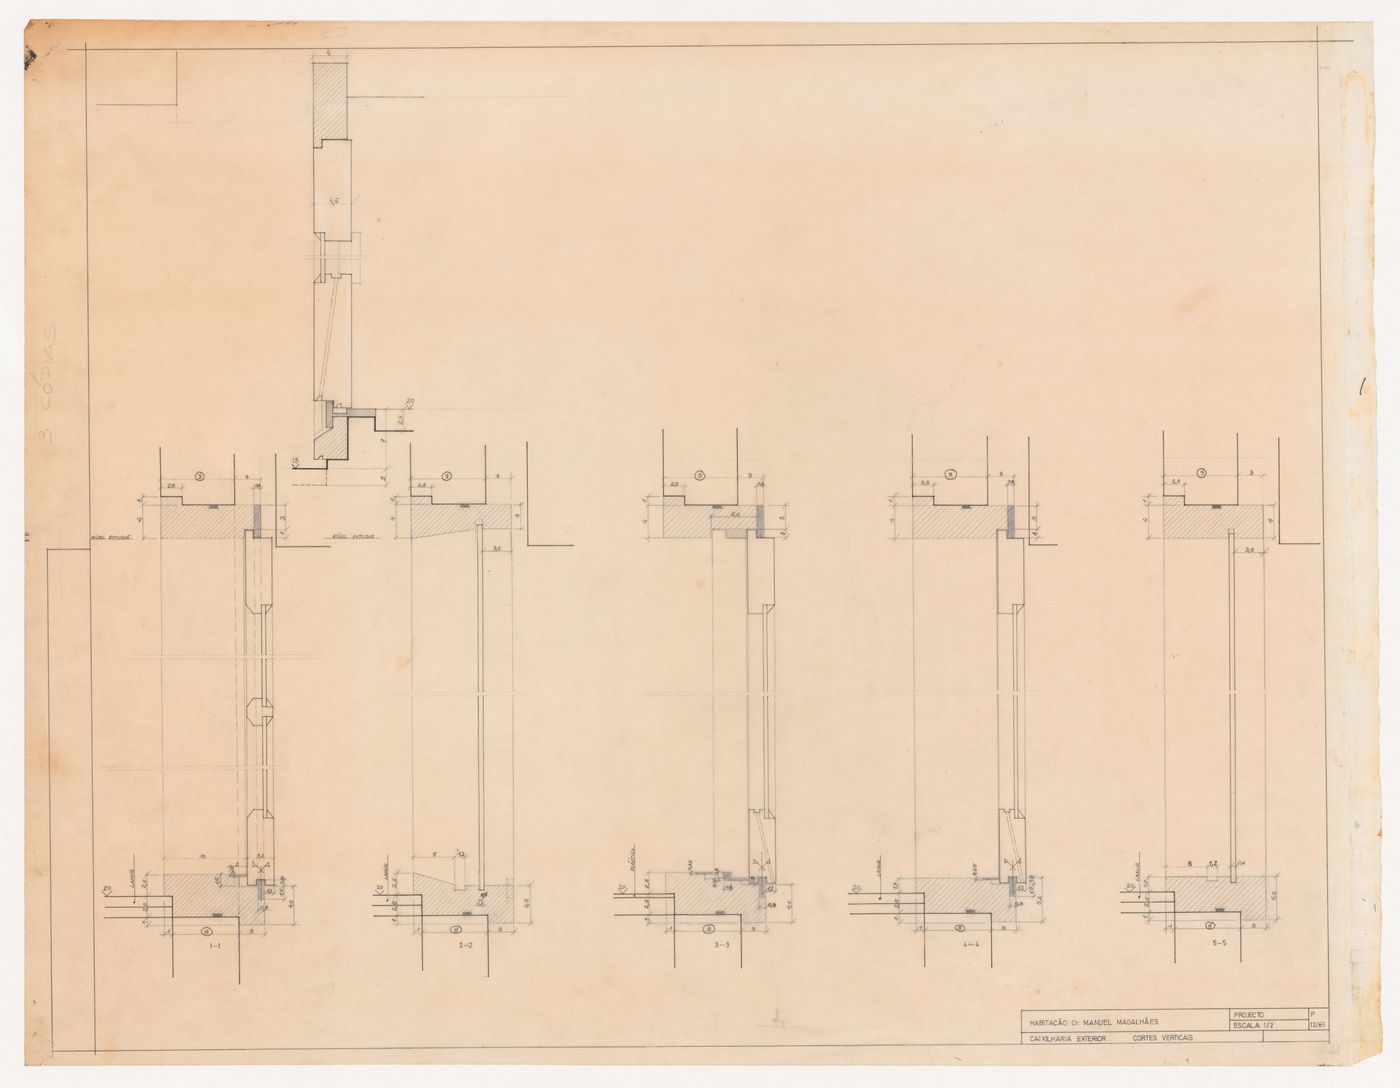 Sections for exterior window frames for Casa Manuel Magalhães, Porto